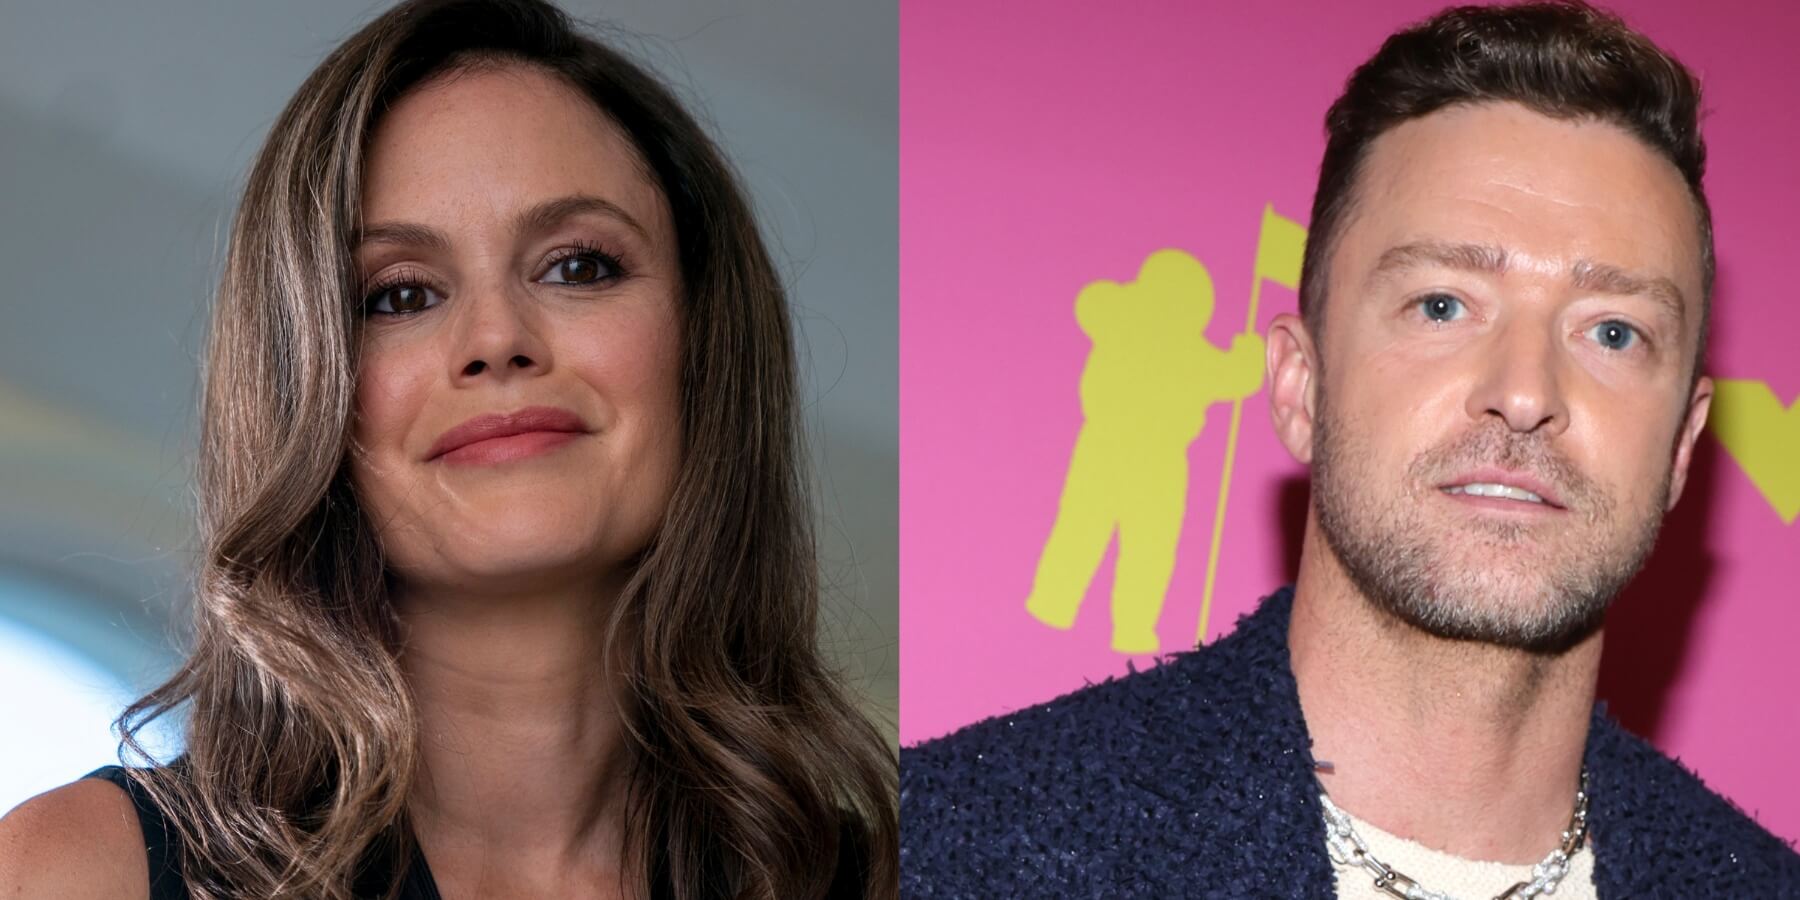 Rachel Bilson and Justin Timberlake in side-by-side photographs taken in 2023.